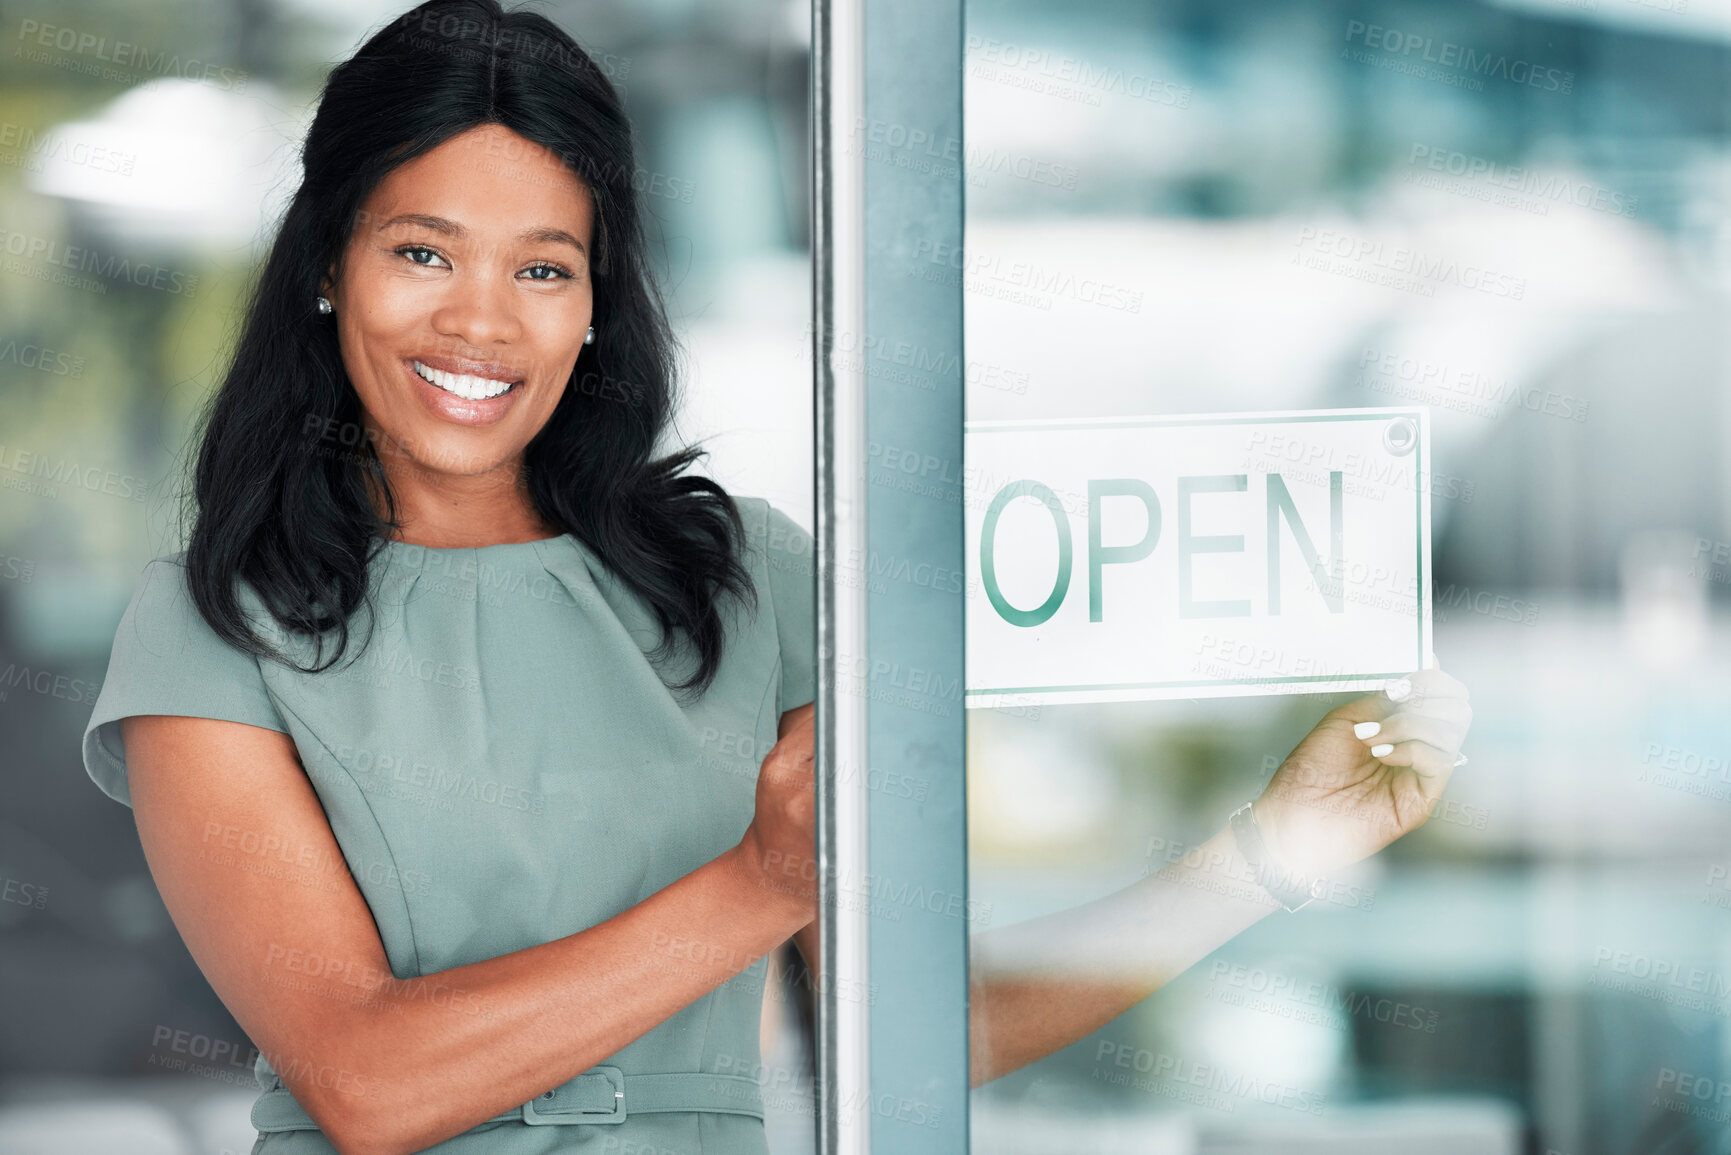 Buy stock photo Open sign, black woman and small business owner of restaurant. Welcome, coffee shop and portrait of happy female entrepreneur from Nigeria in startup cafe ready for  service while standing at door.